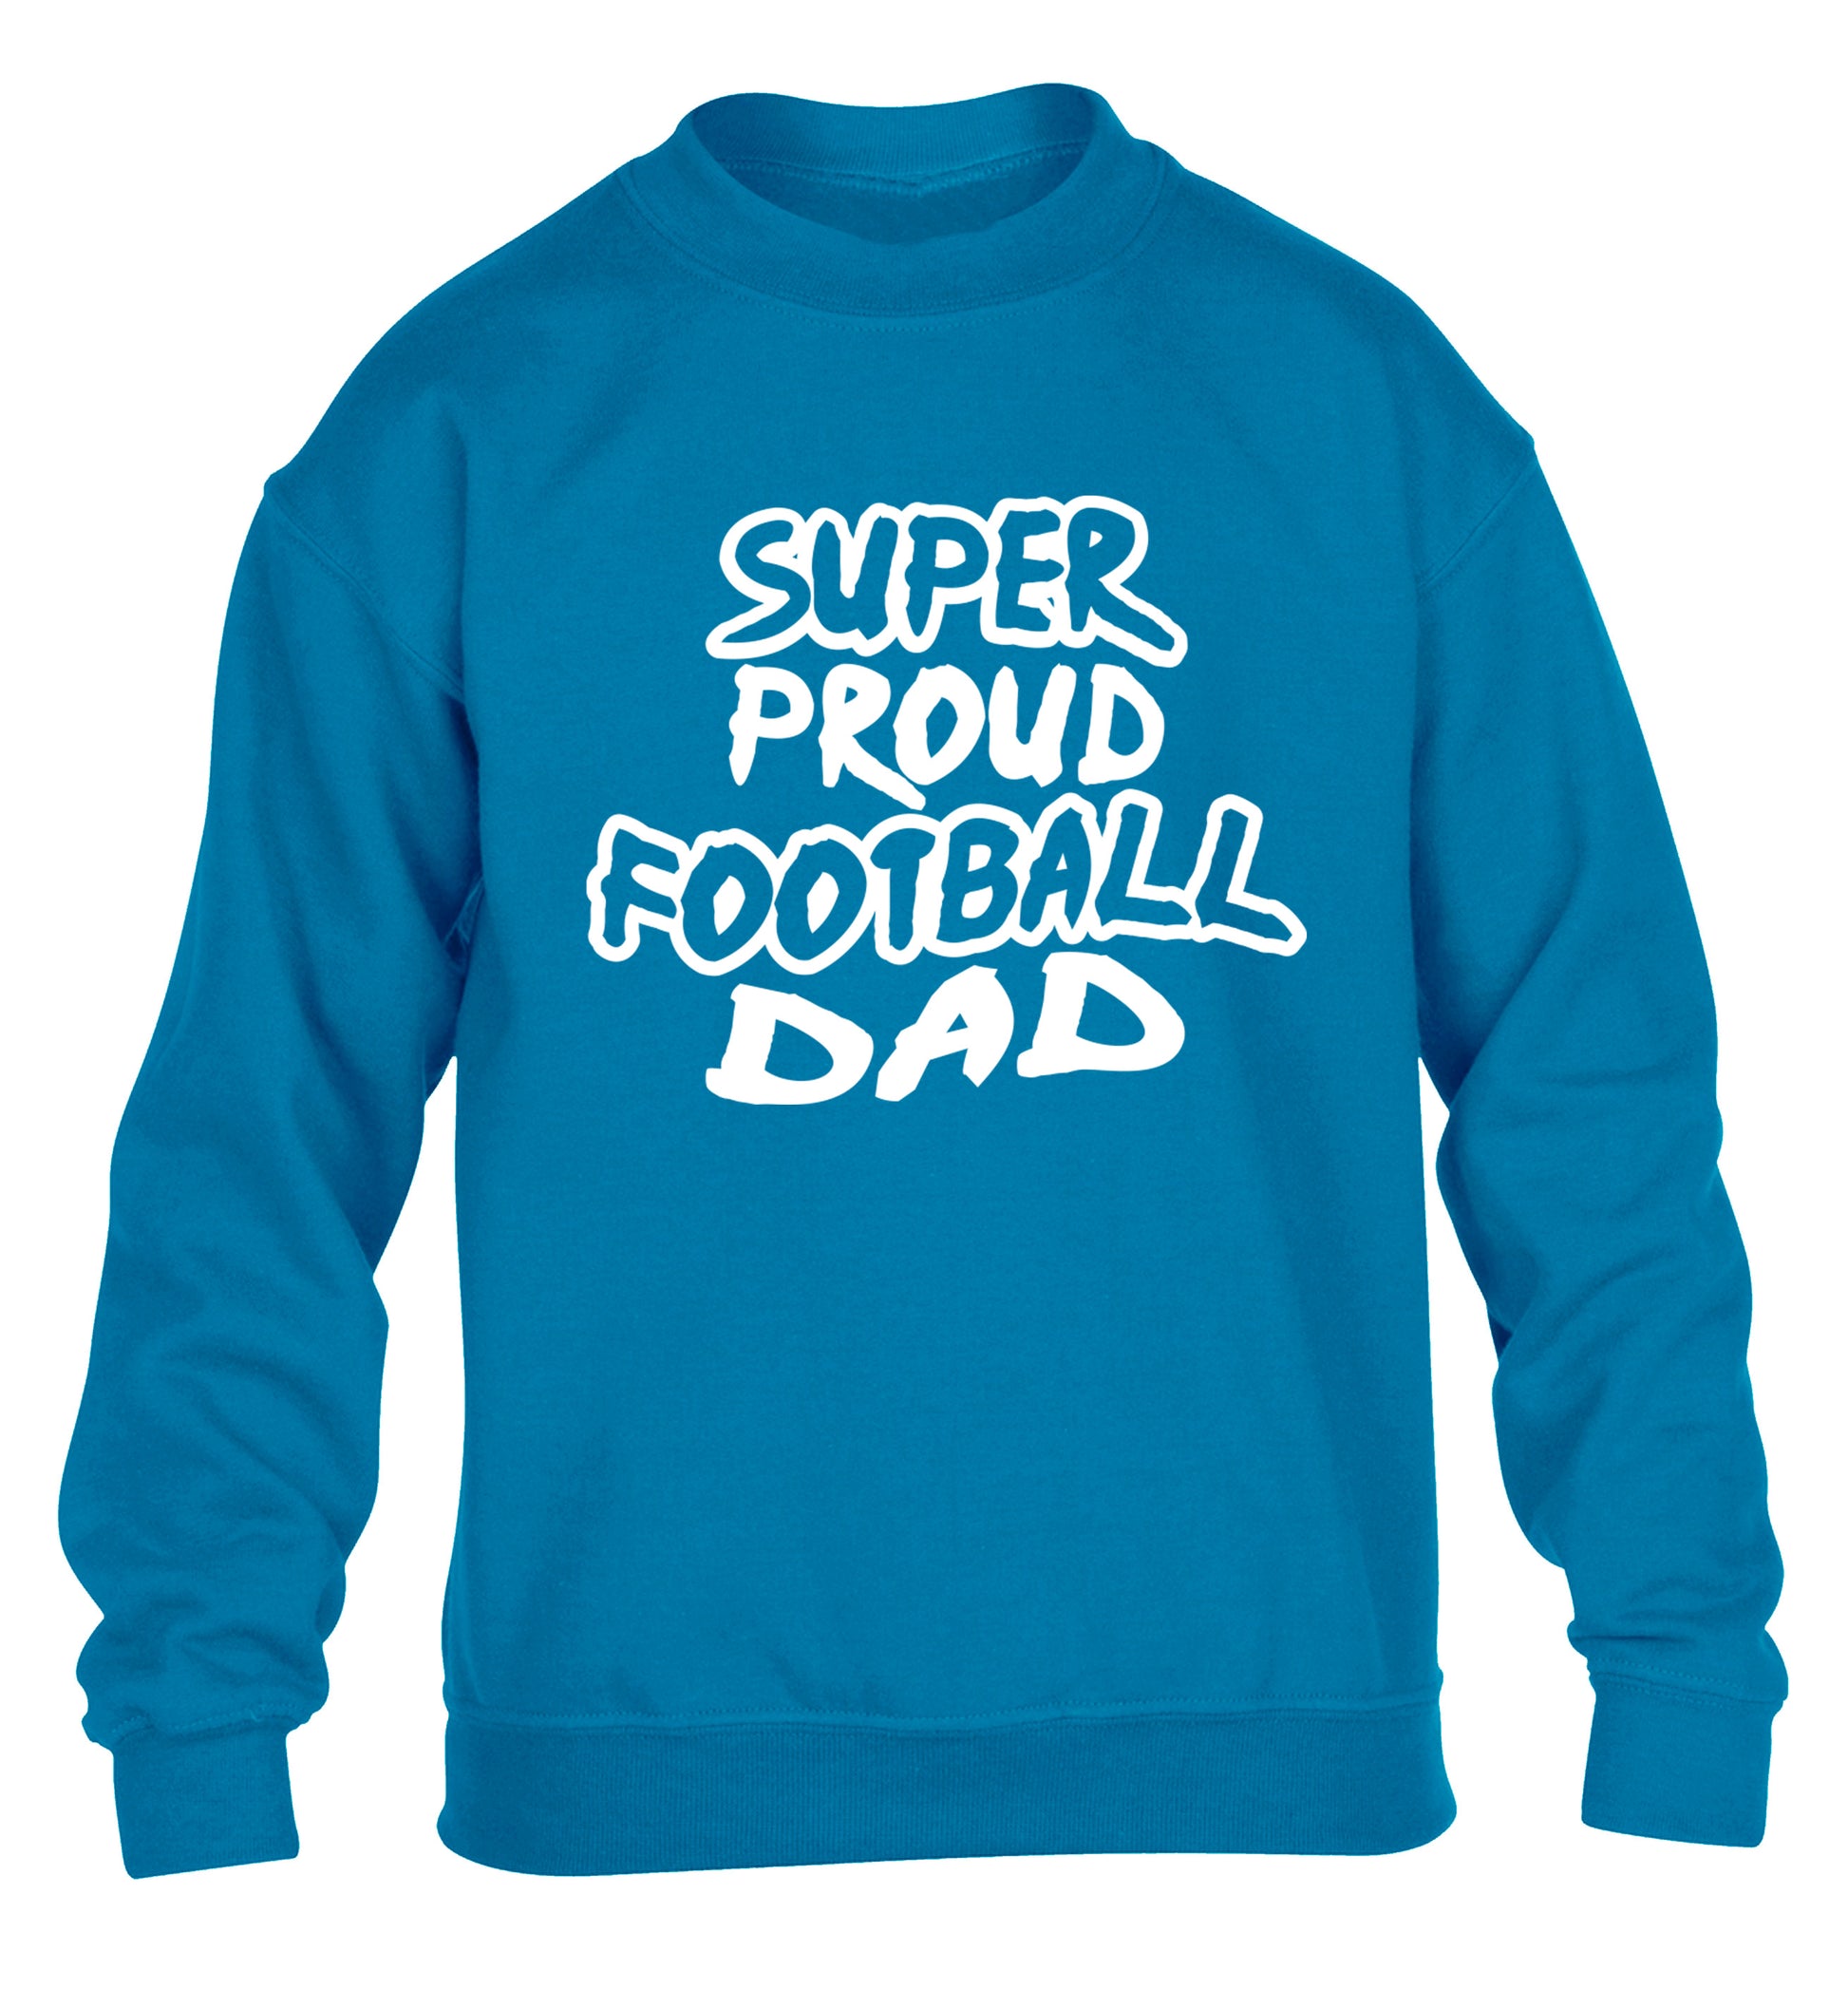 Super proud football dad children's blue sweater 12-14 Years